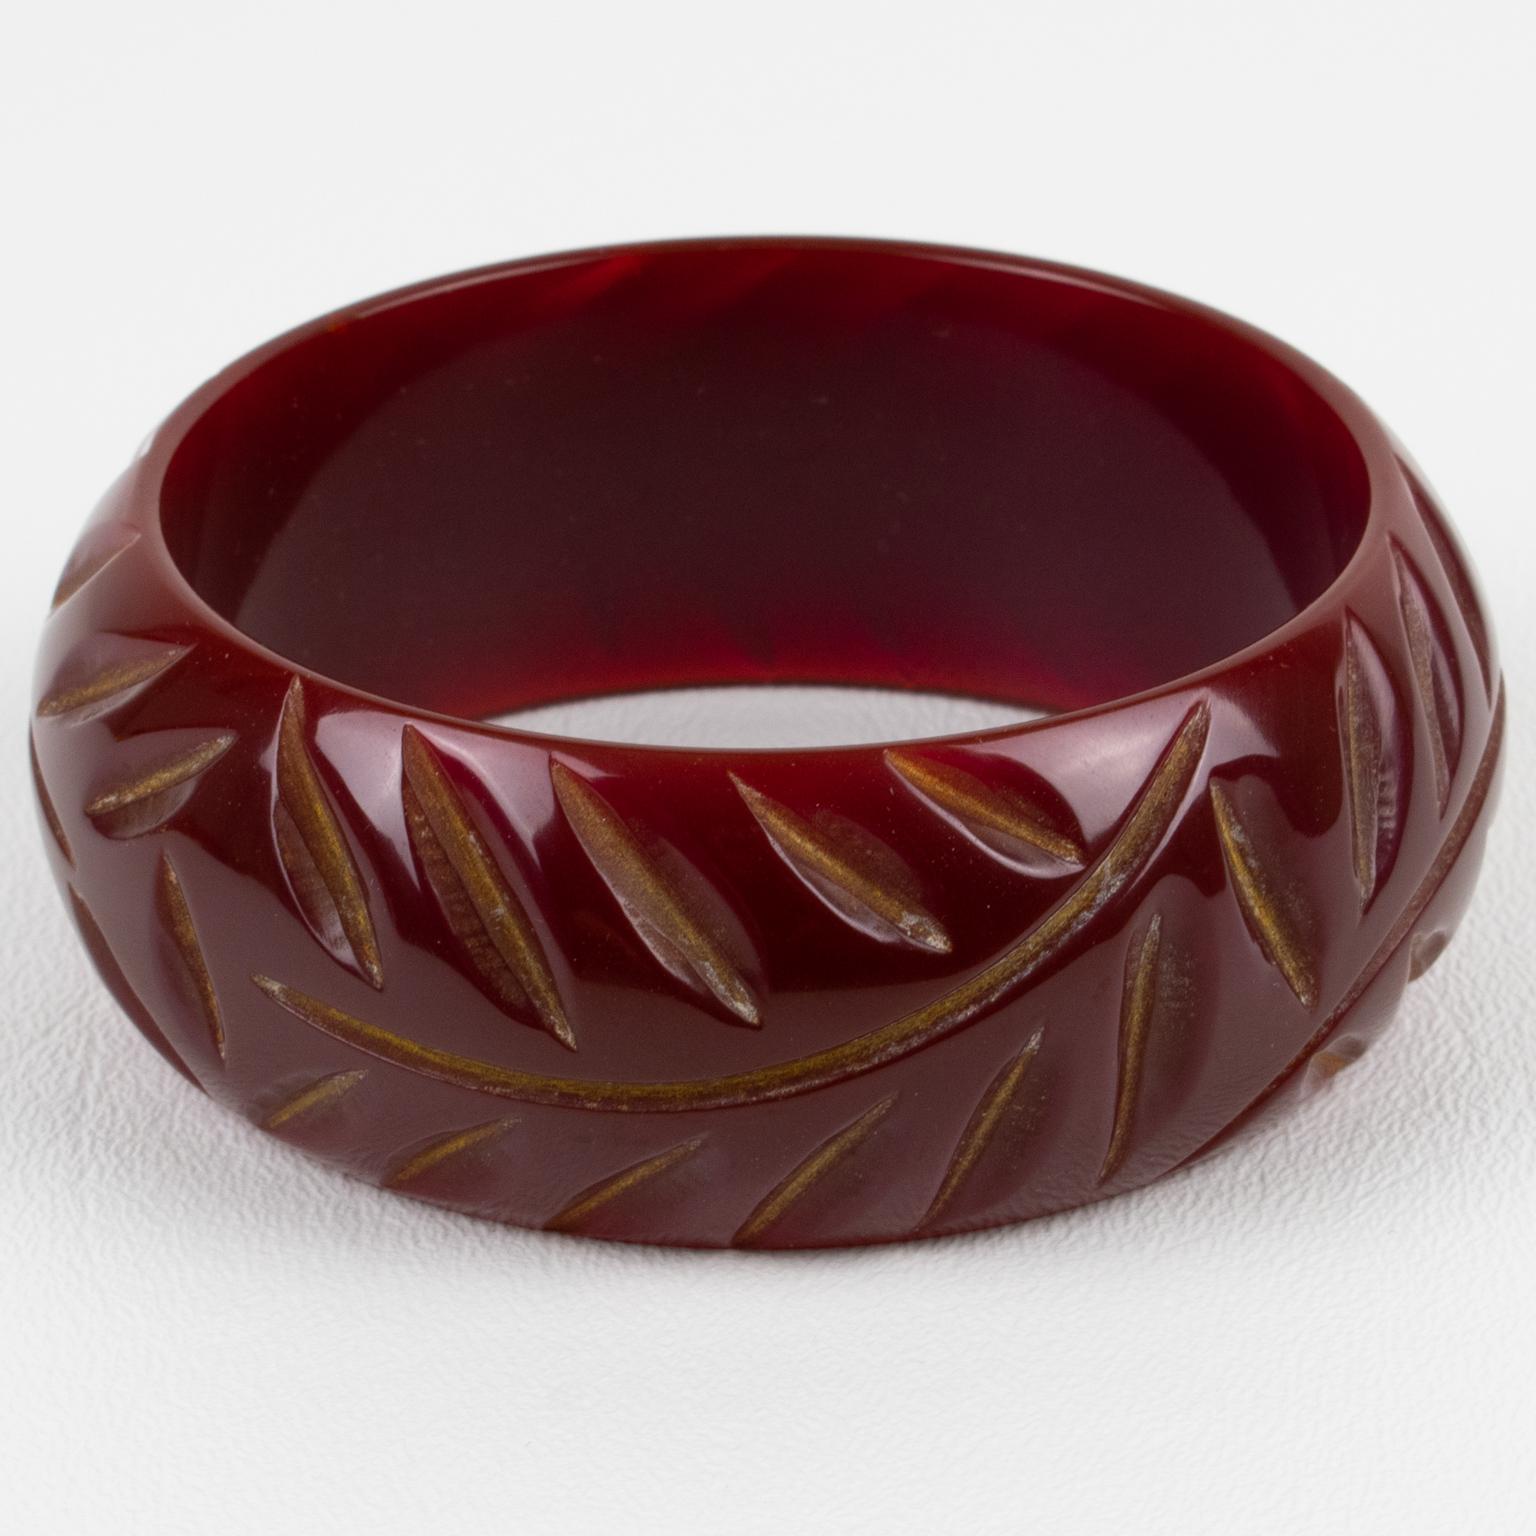 This is a fabulous dark cranberry red Bakelite bracelet bangle. It features a chunky domed shape with geometric and deeply carved designs all around. The color is an intense dark red plain tone with a light purple overtone. 
Measurements: Inside